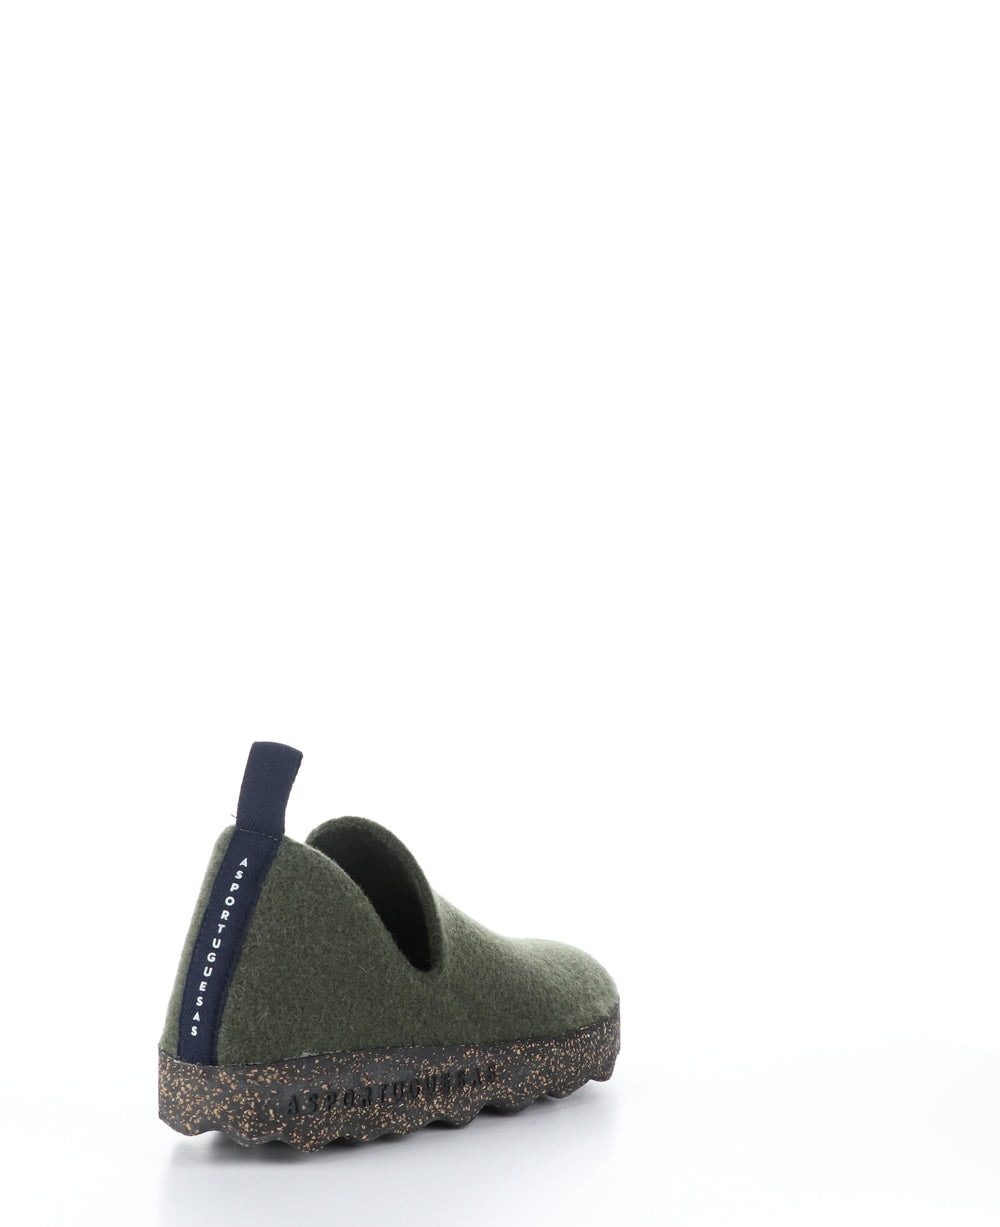 CITY Military Green Round Toe Shoes|CITY Chaussures à Bout Rond in Vert